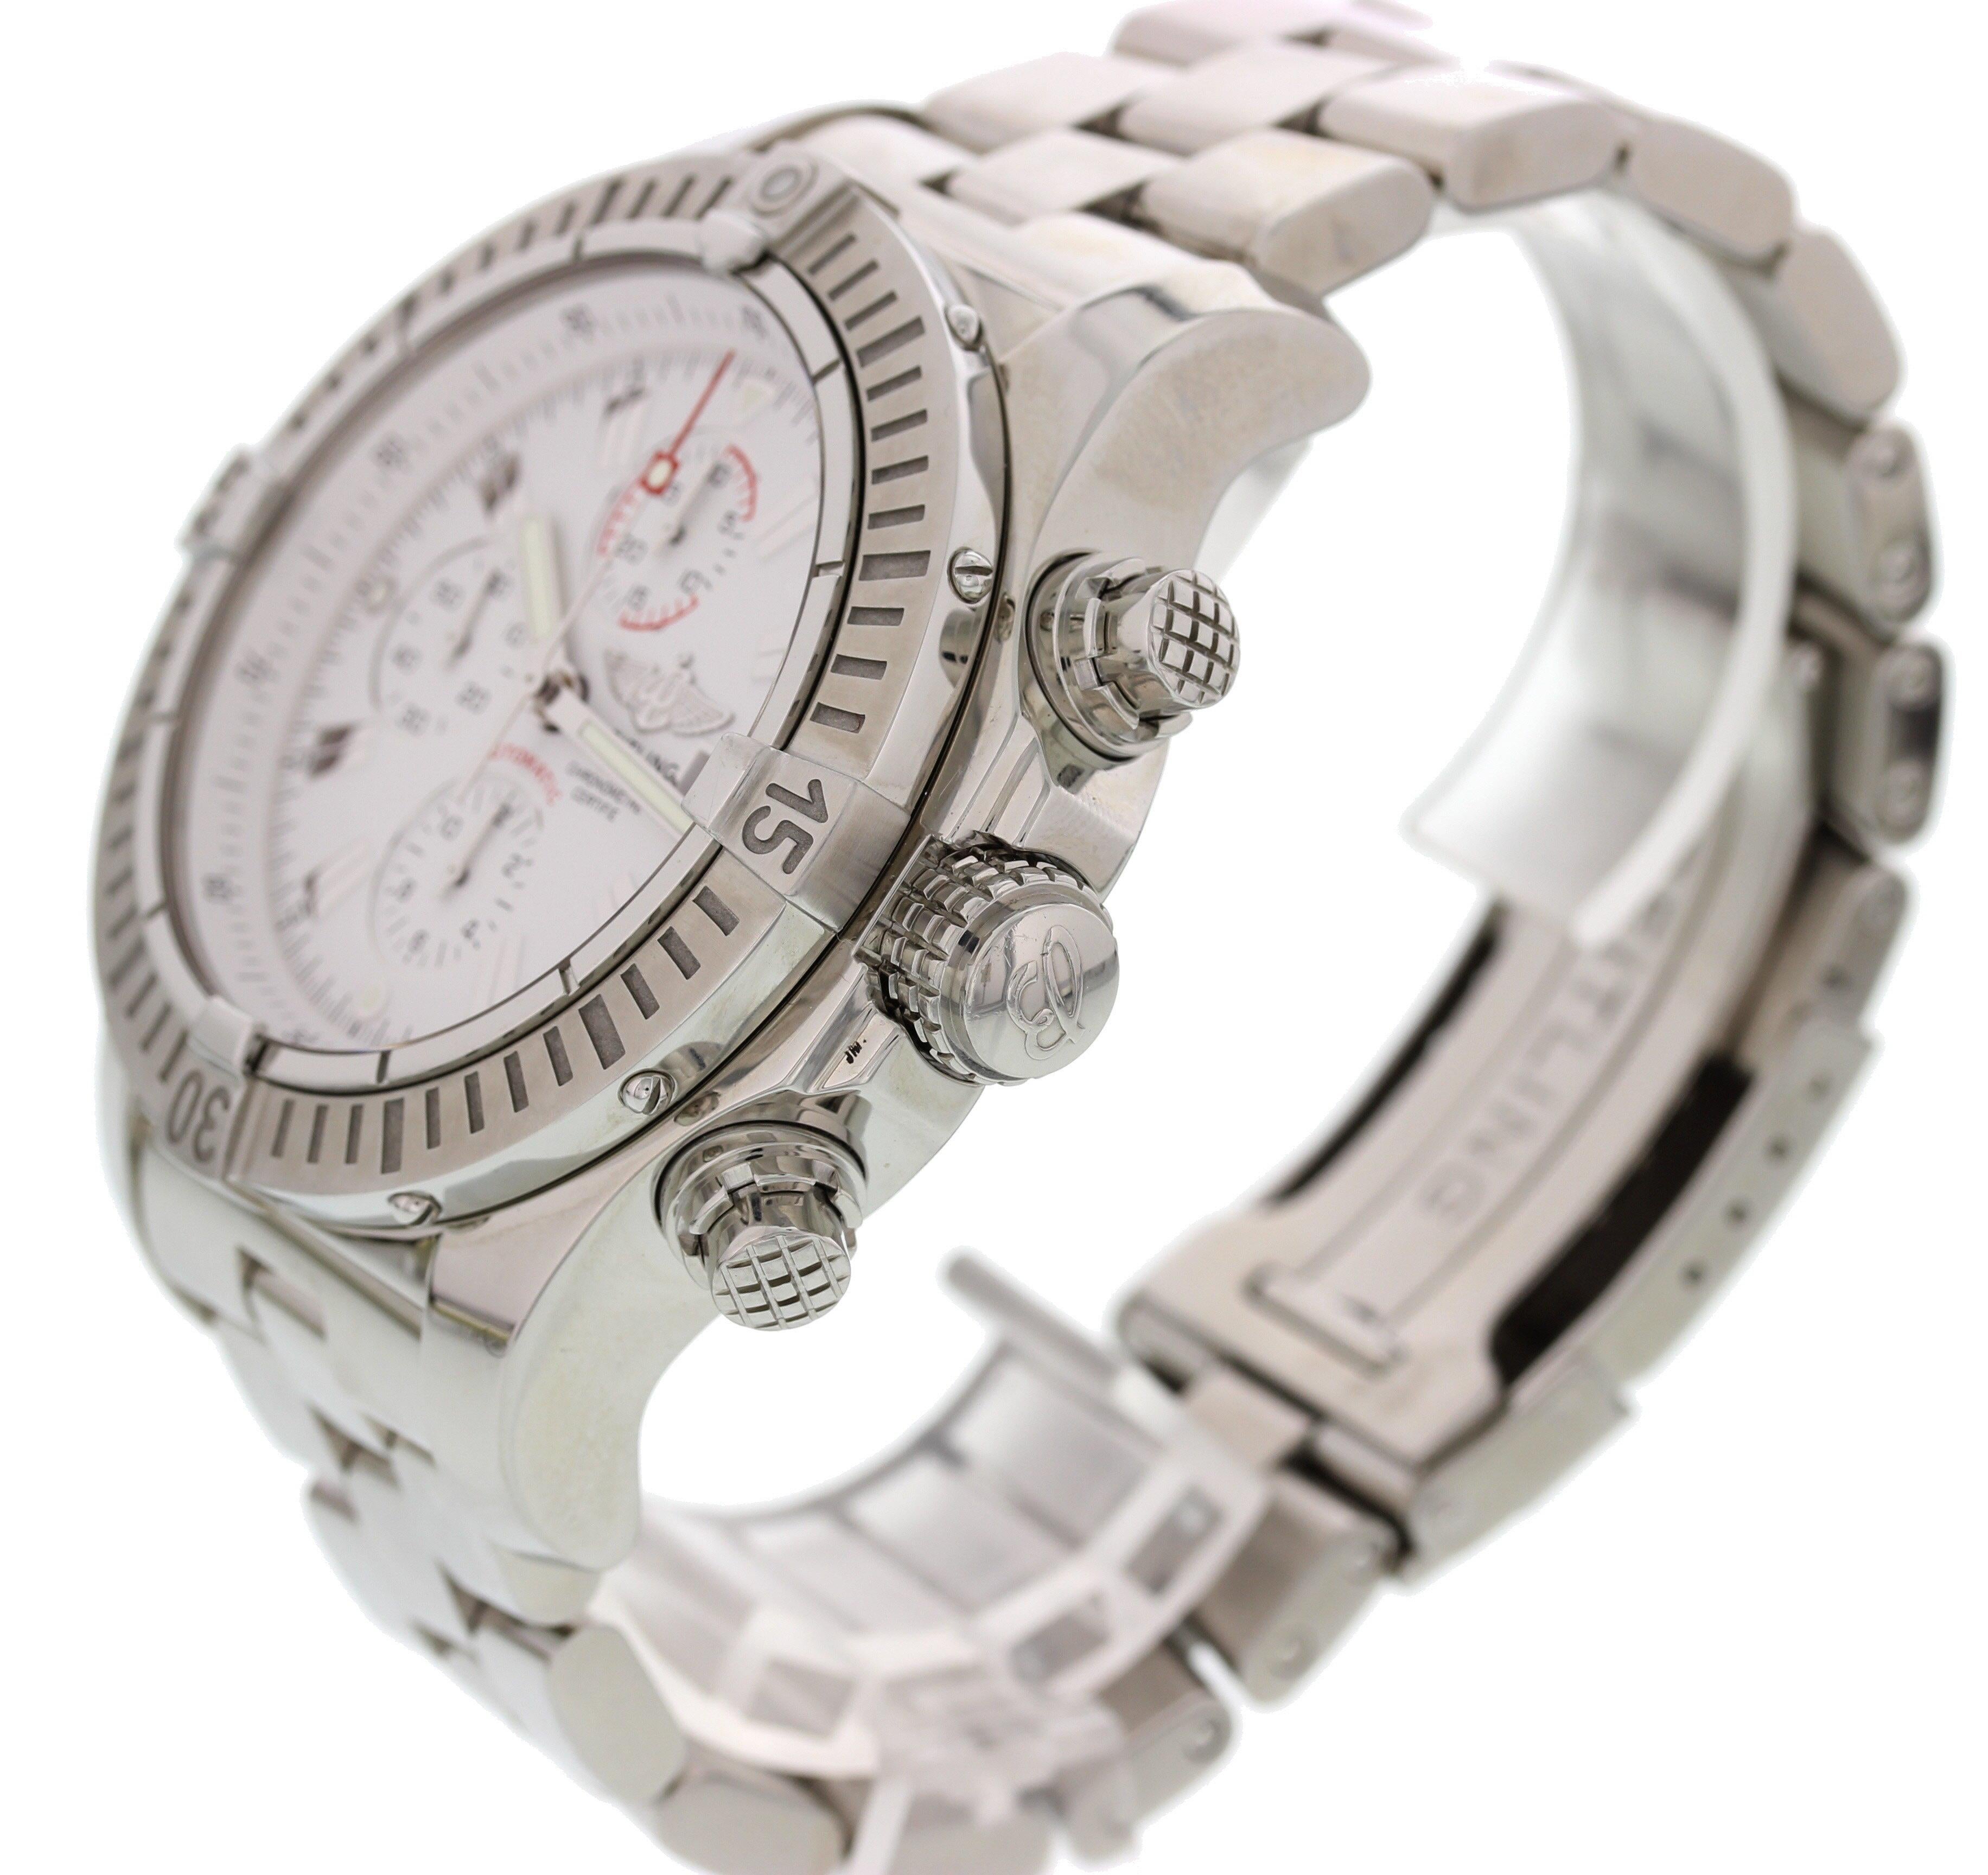 Breitling Super Avenger Chronograph A13370. 48 mm stainless steel case. Stainless steel unidirectional rotating bezel. White dial with date display and luminous hands. Stainless steel bracelet will fit up to 7.5 inch wrist. Automatic movement.